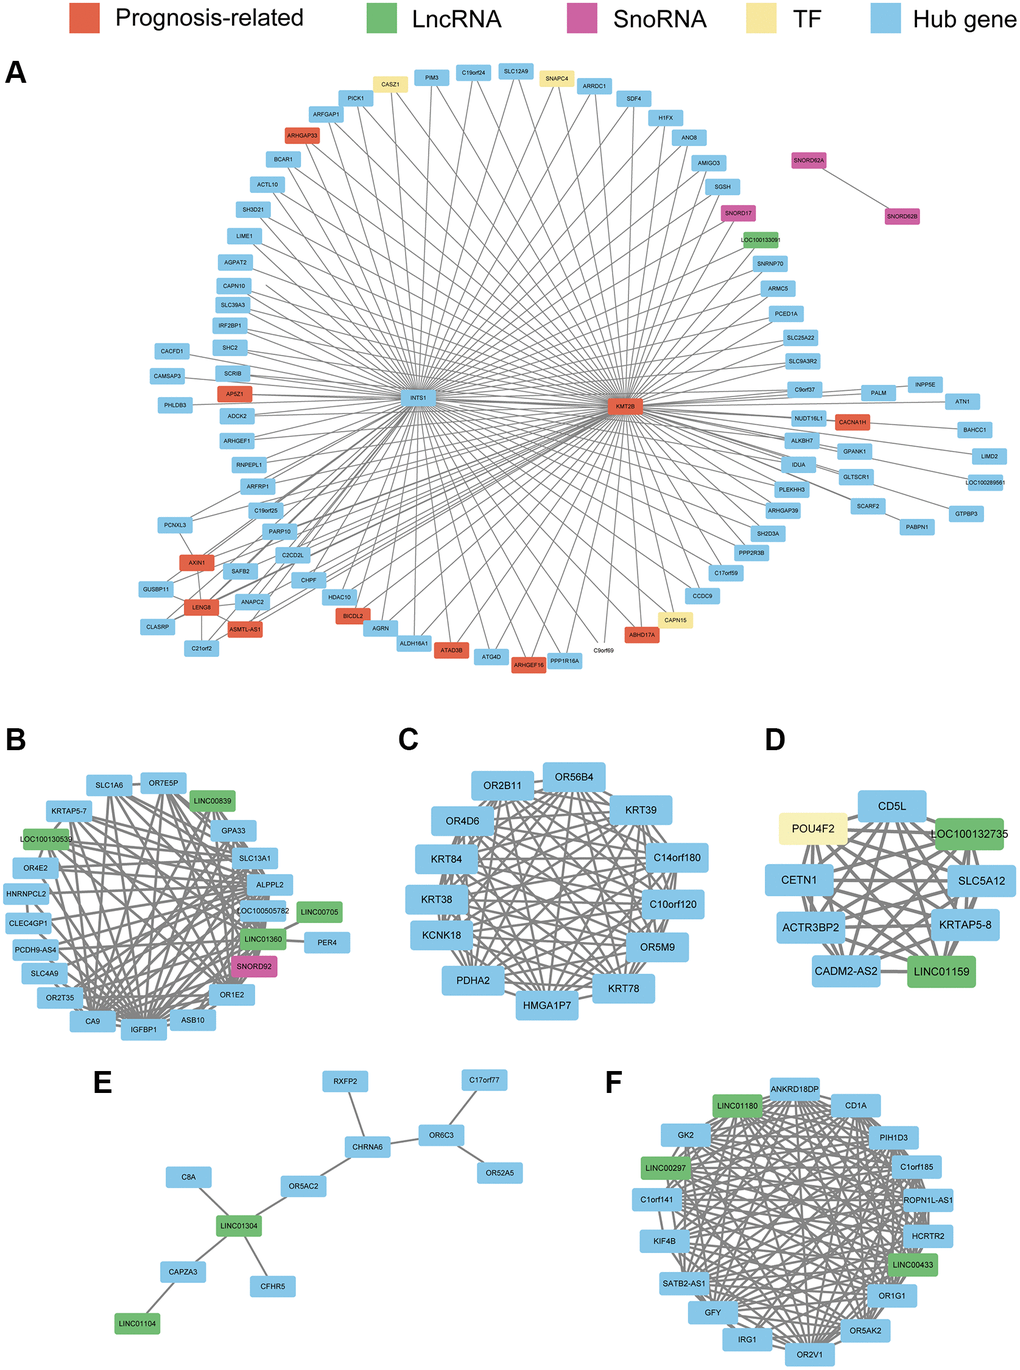 Co-expression network constructed with hub genes in the turquoise module (A), cyan module (B), green module (C), magenta module (D), salmon module (E), and pink module (F). Every node represents a hub gene or hub gene of co-expressed genes; genes significantly correlated with prognosis are colored red. LncRNAs, SnoRNAs, and transcription factors (TFs) are vital regulatory molecules and are colored with green, purple, and yellow, respectively. For the turquoise module, to obtain a clear picture, the edges weighted above 0.25 are displayed, whereas in the other six modules, edges weighted above 0.1 are displayed.